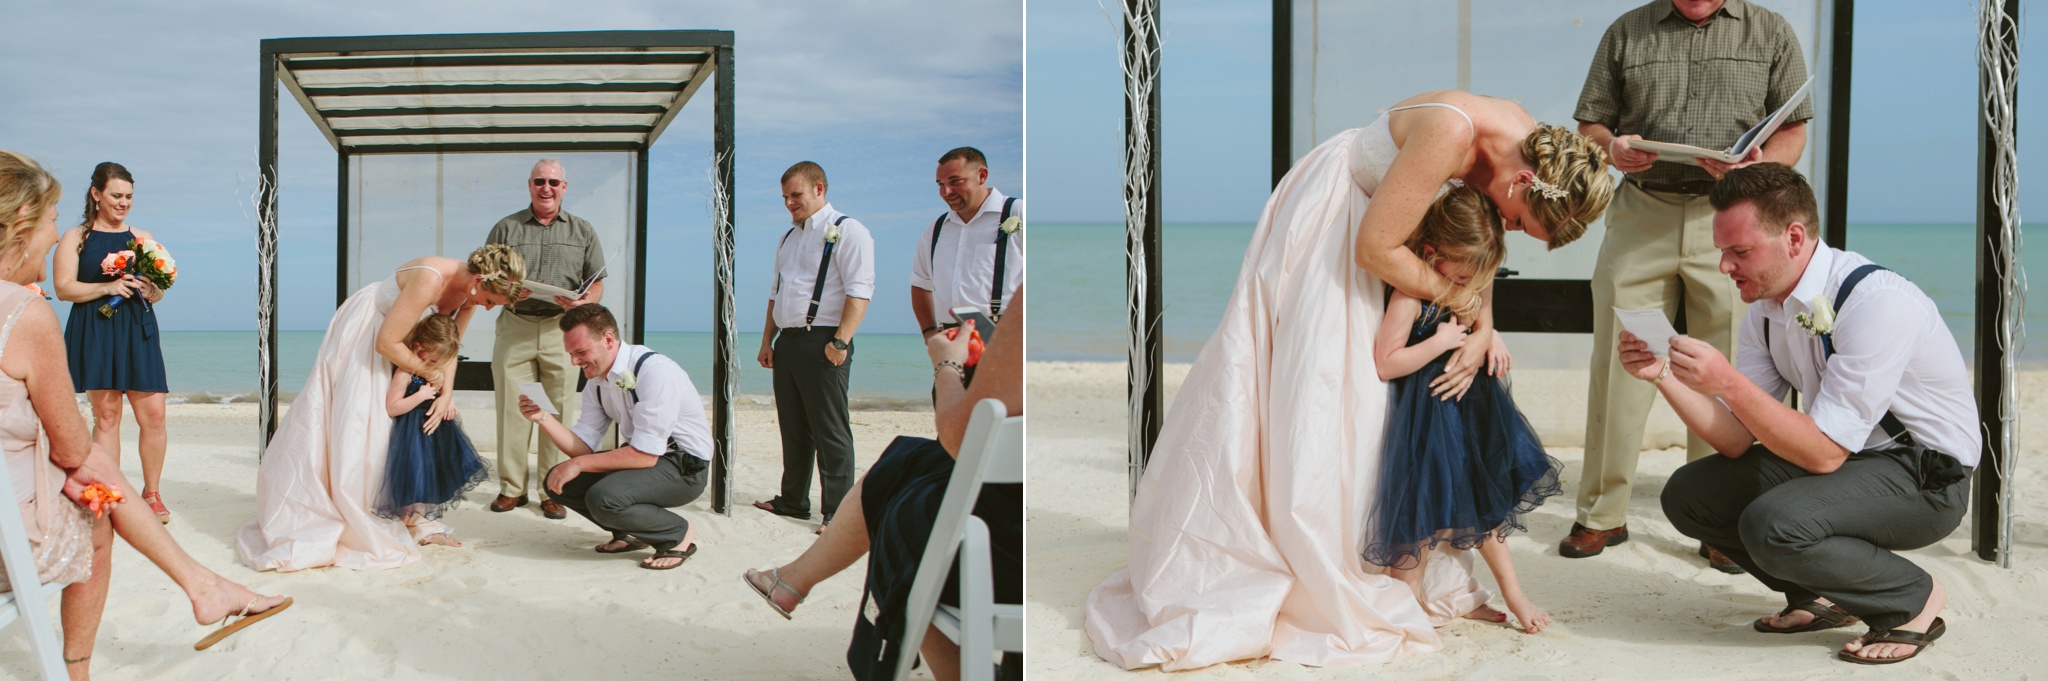 Moon Palace Resort Cancun Mexico Wedding Photos Ceremony Groom Saying Vows to Daughter